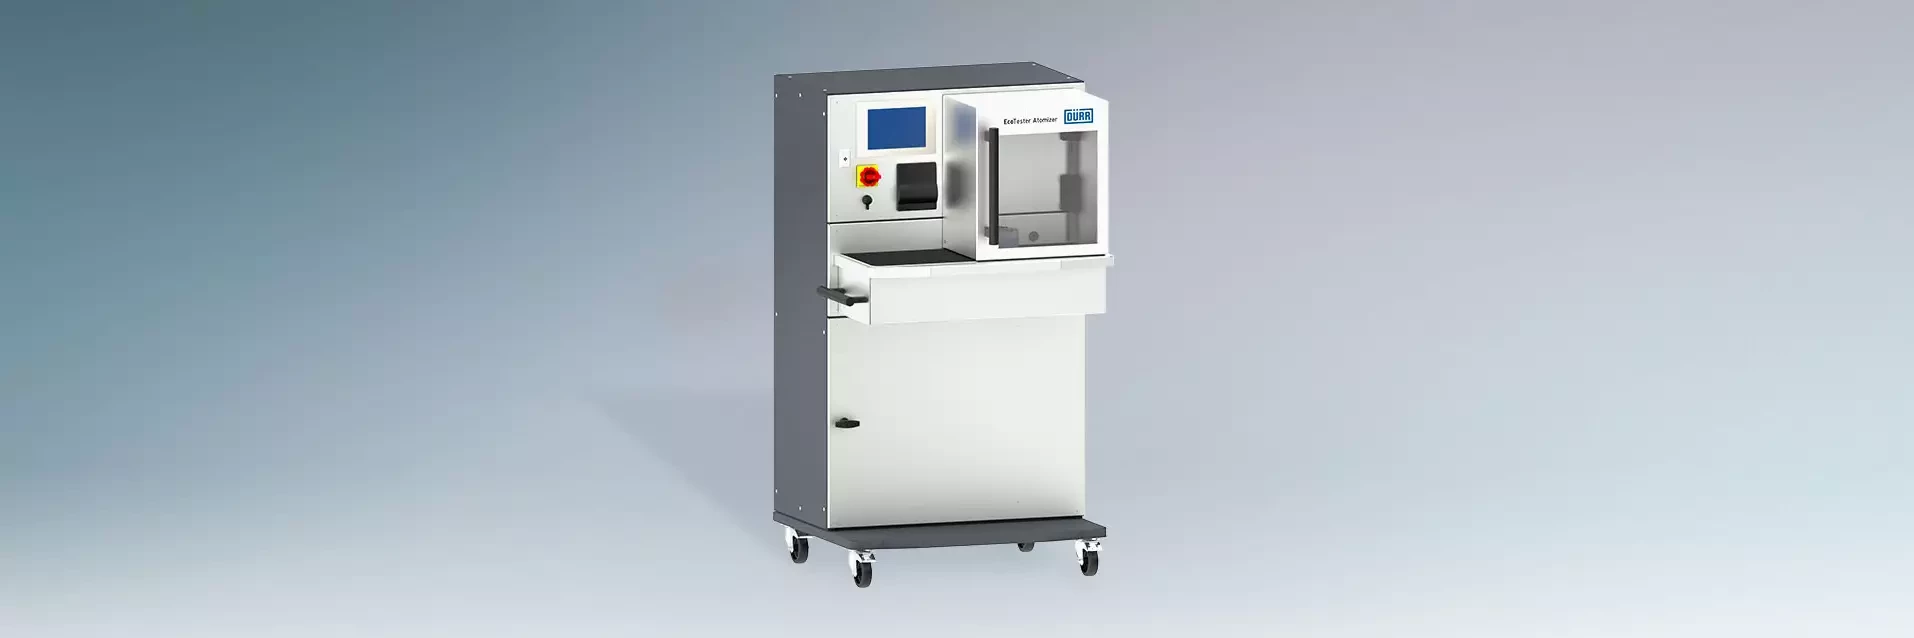 Dürr's EcoTester enables fully functioning atomizers 